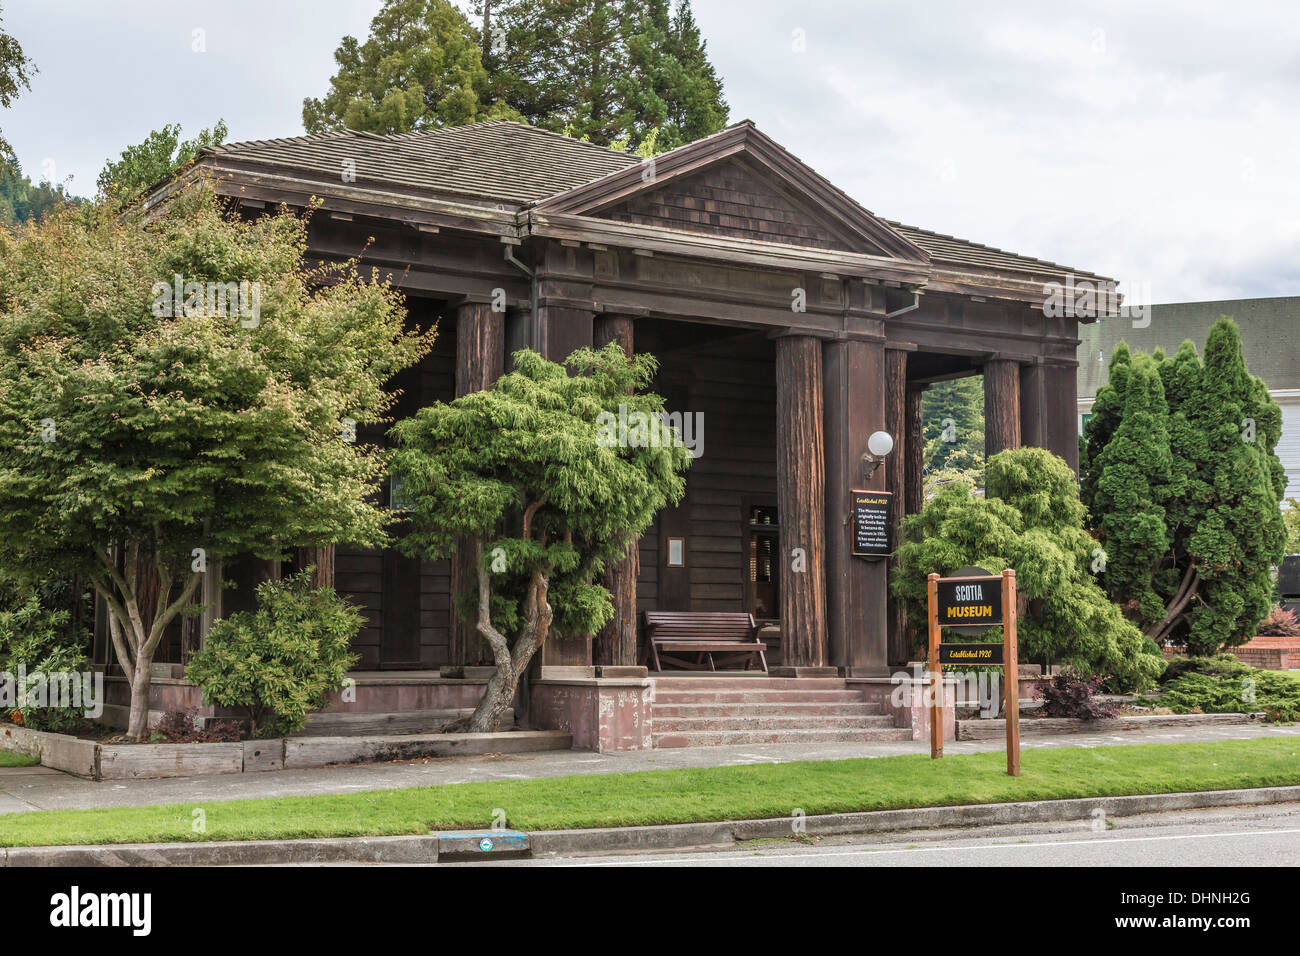 The Greek Revival style Scotia Museum, built in 1920 as a bank, includes beautiful redwood trunk columns in front, California Stock Photo